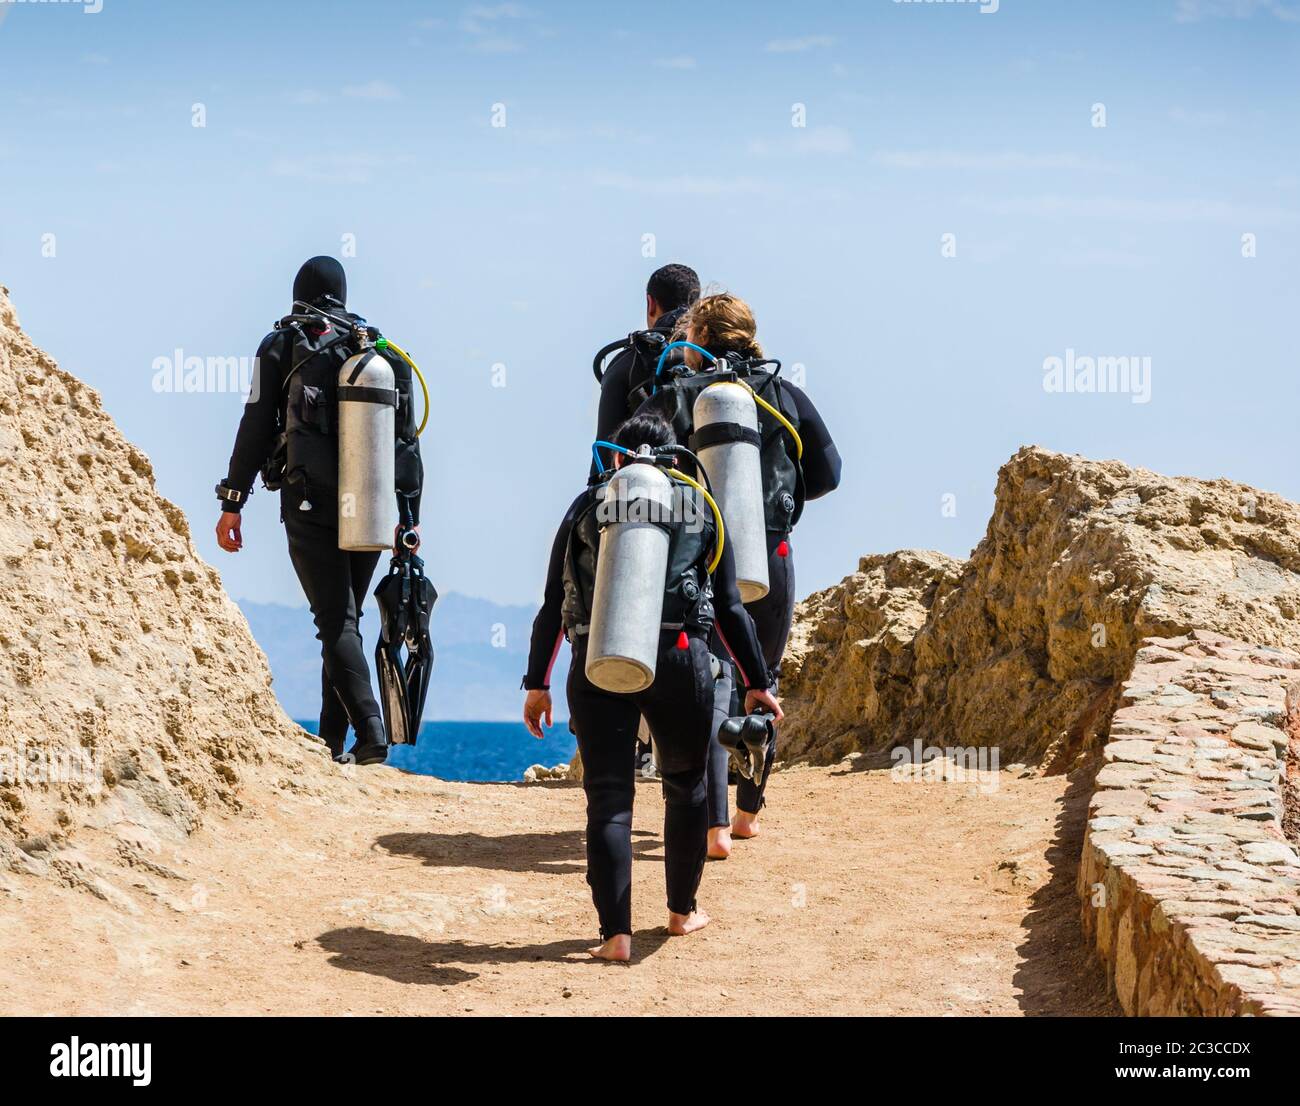 group of divers with equipment for diving go to the sea against the blue sky and clouds in Egypt Dah Stock Photo